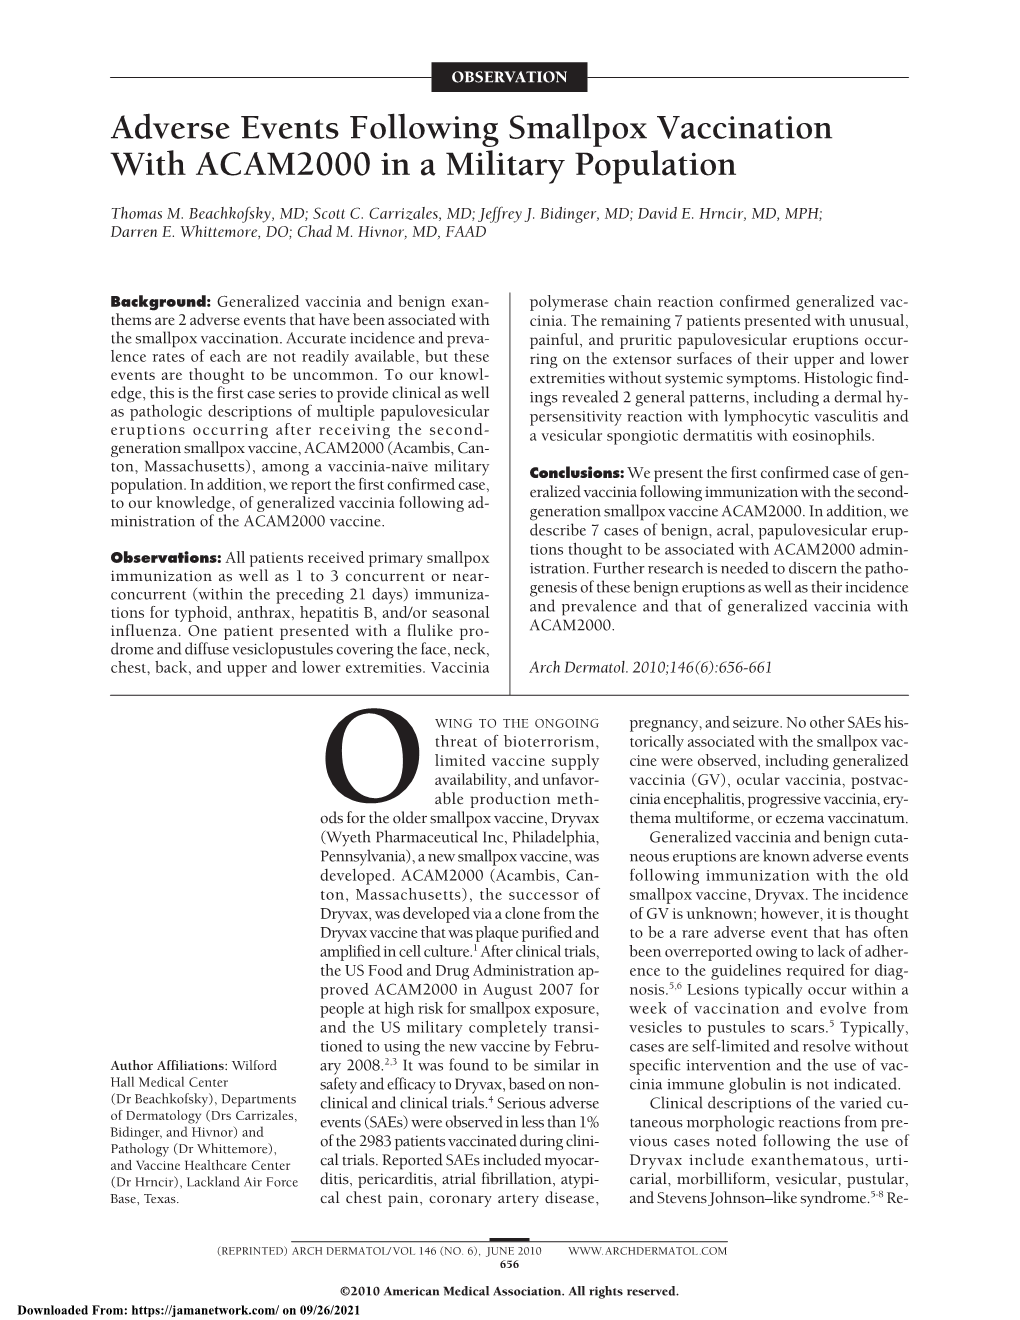 Adverse Events Following Smallpox Vaccination with ACAM2000 in a Military Population